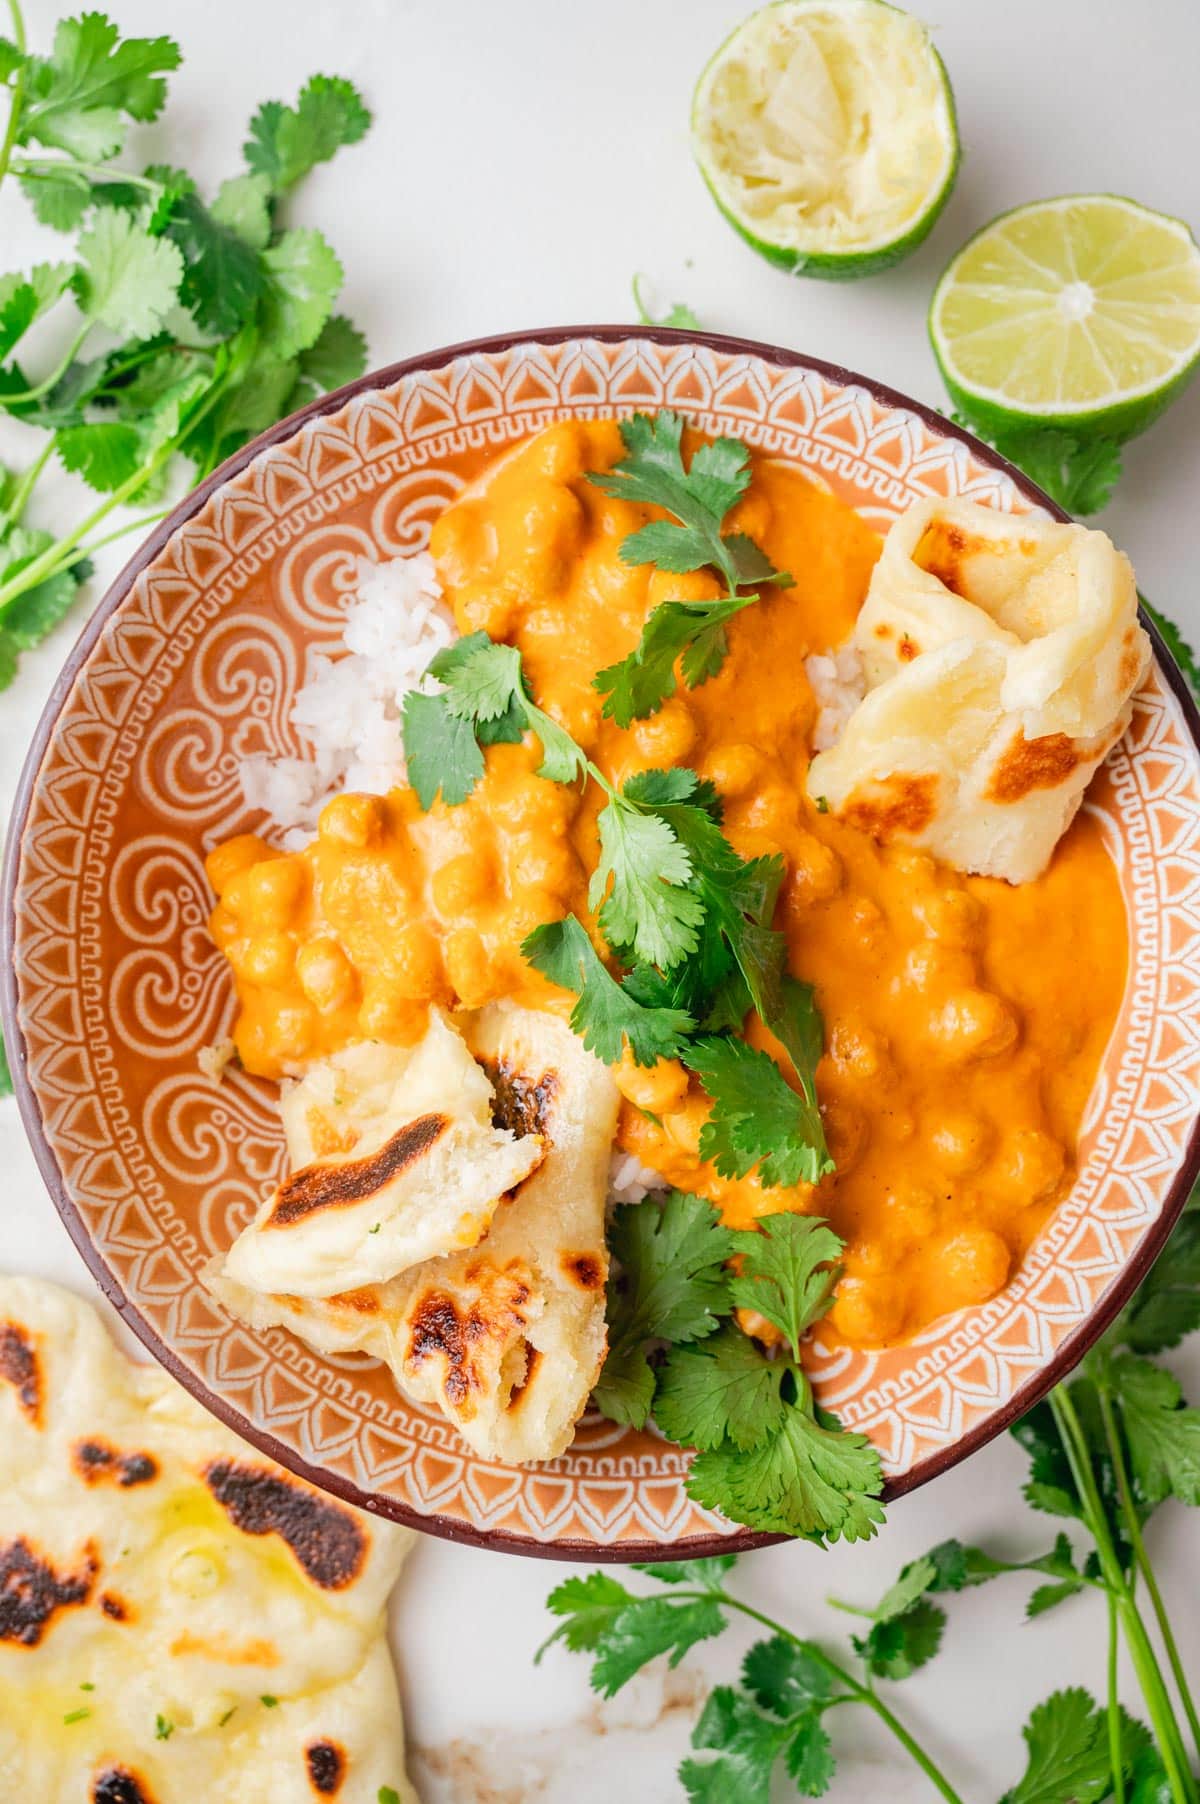 Chickpea curry with rice, Naan bread pieces, and cilantro in a brown bowl. Limes and cilantro leaves around the bowl.